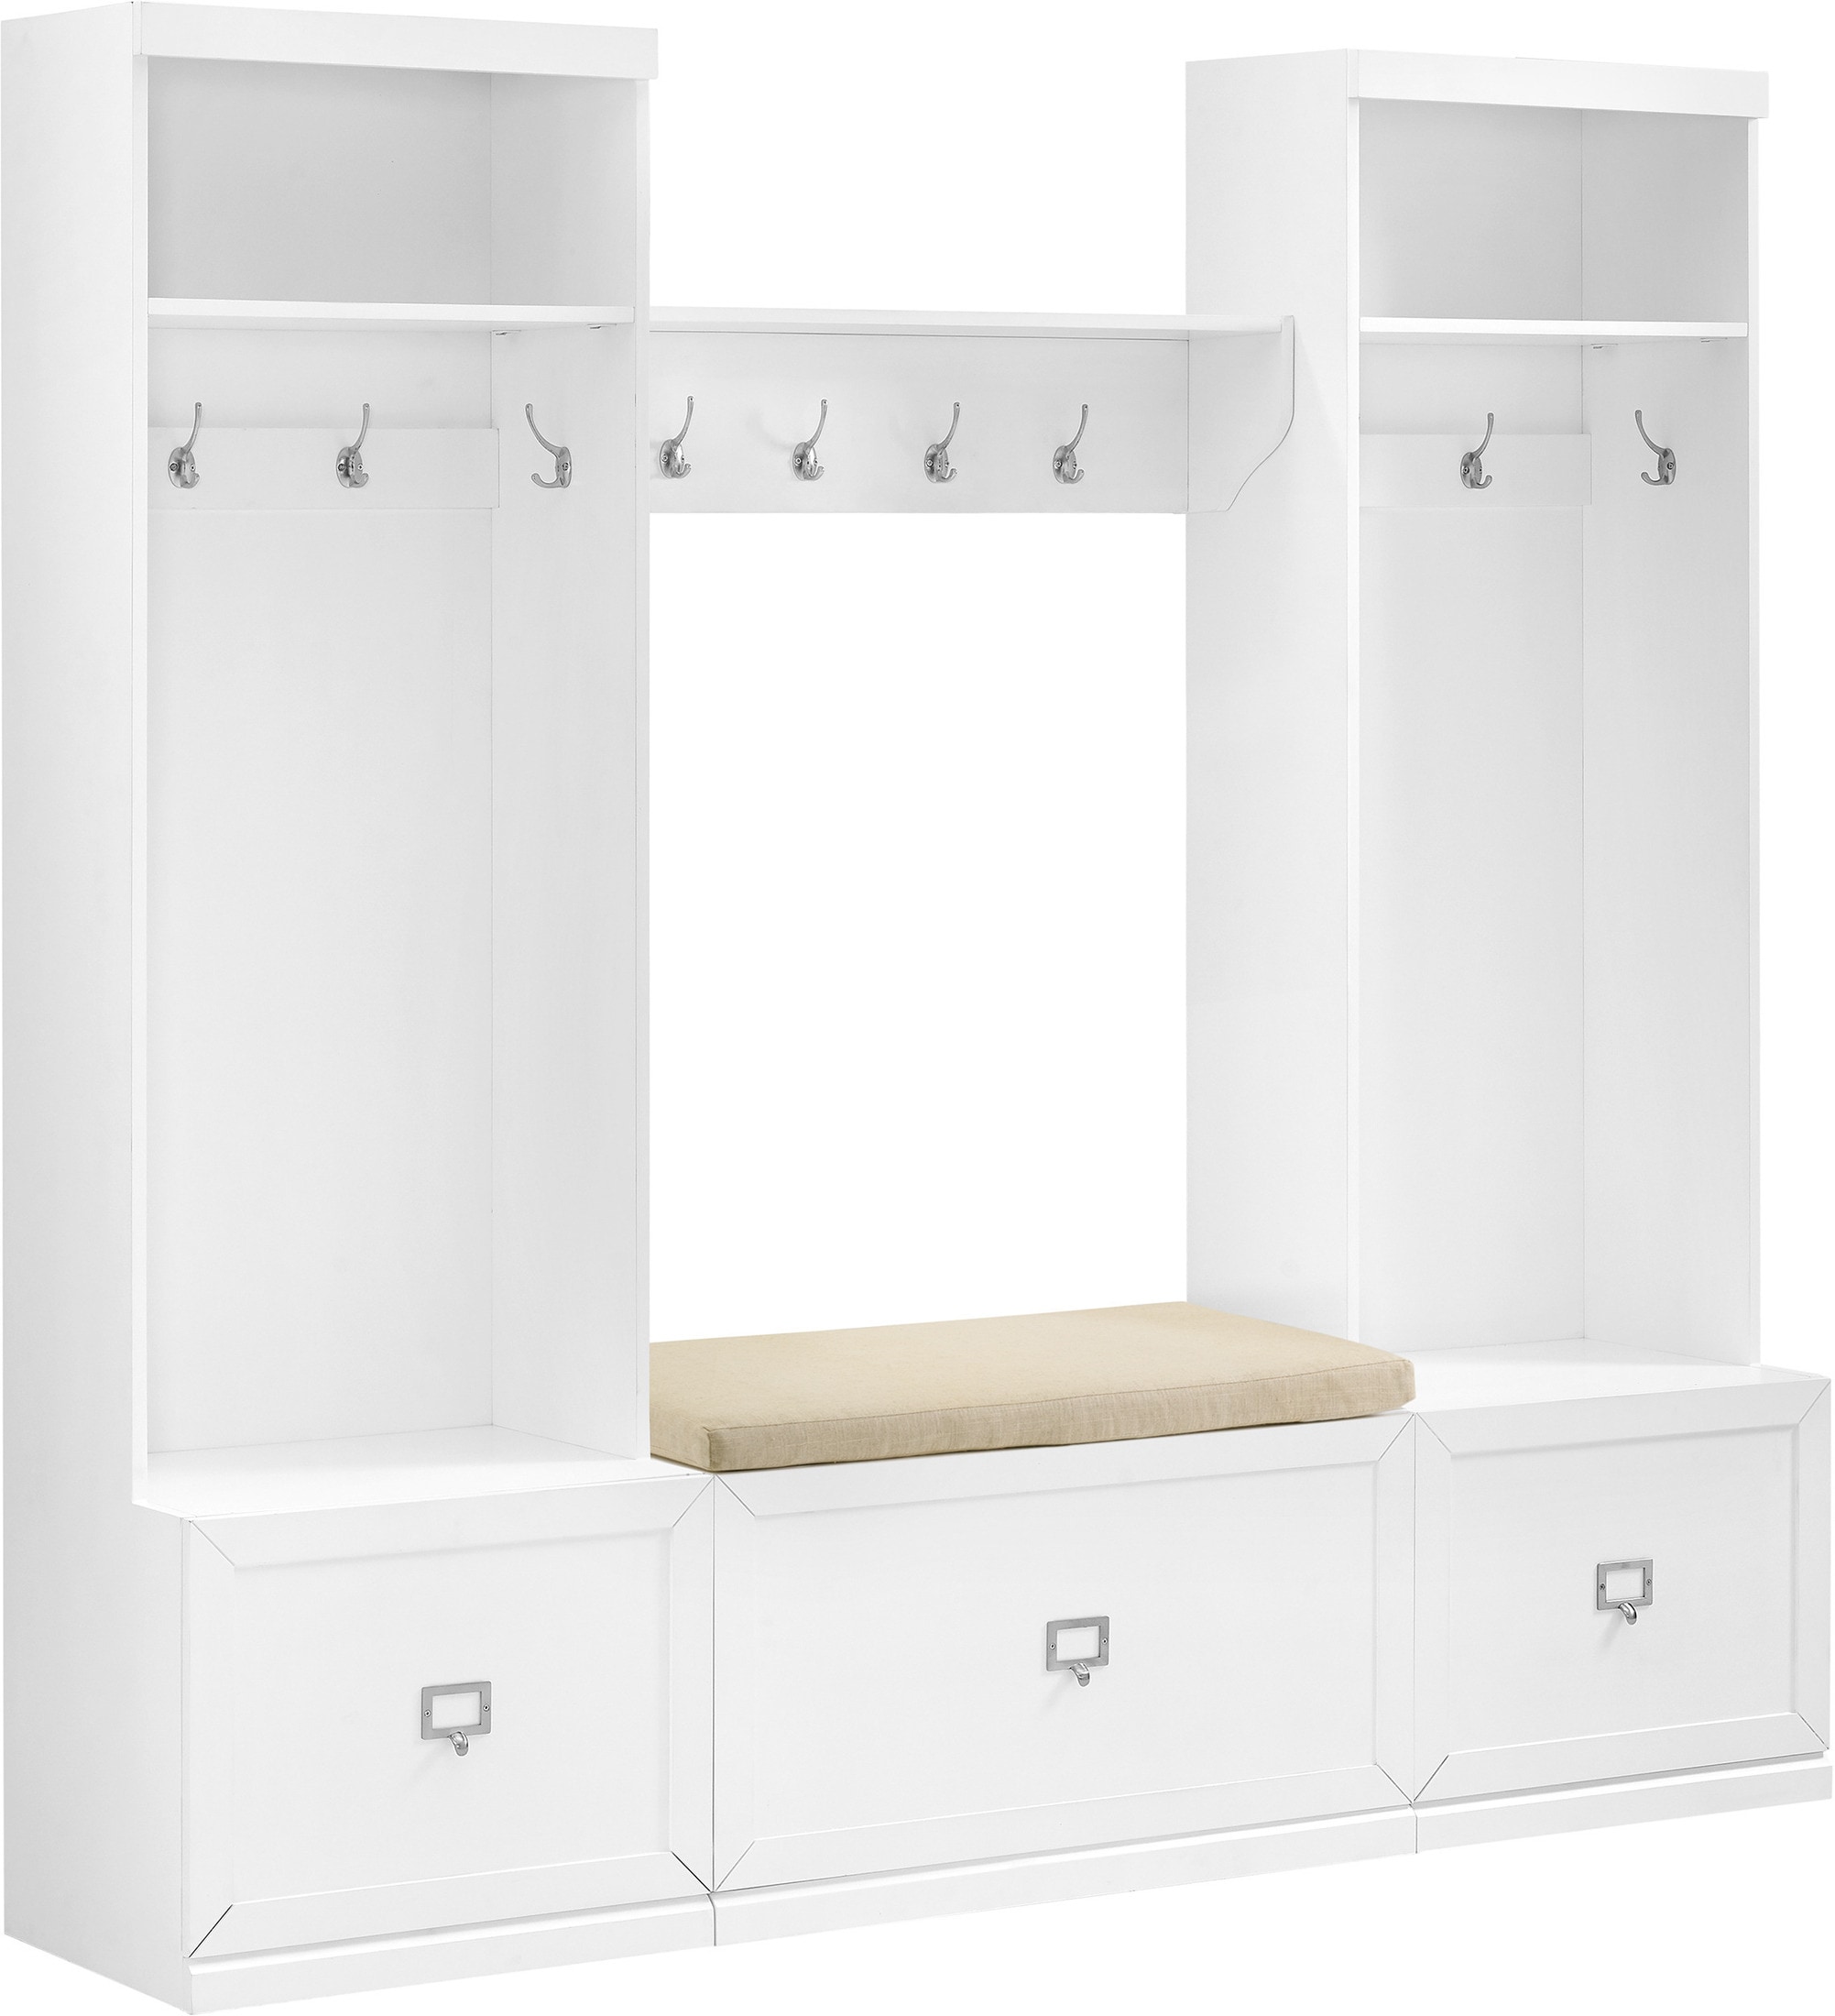 Caddie 2 Hall Trees, Bench, and Shelf Set | Value City Furniture